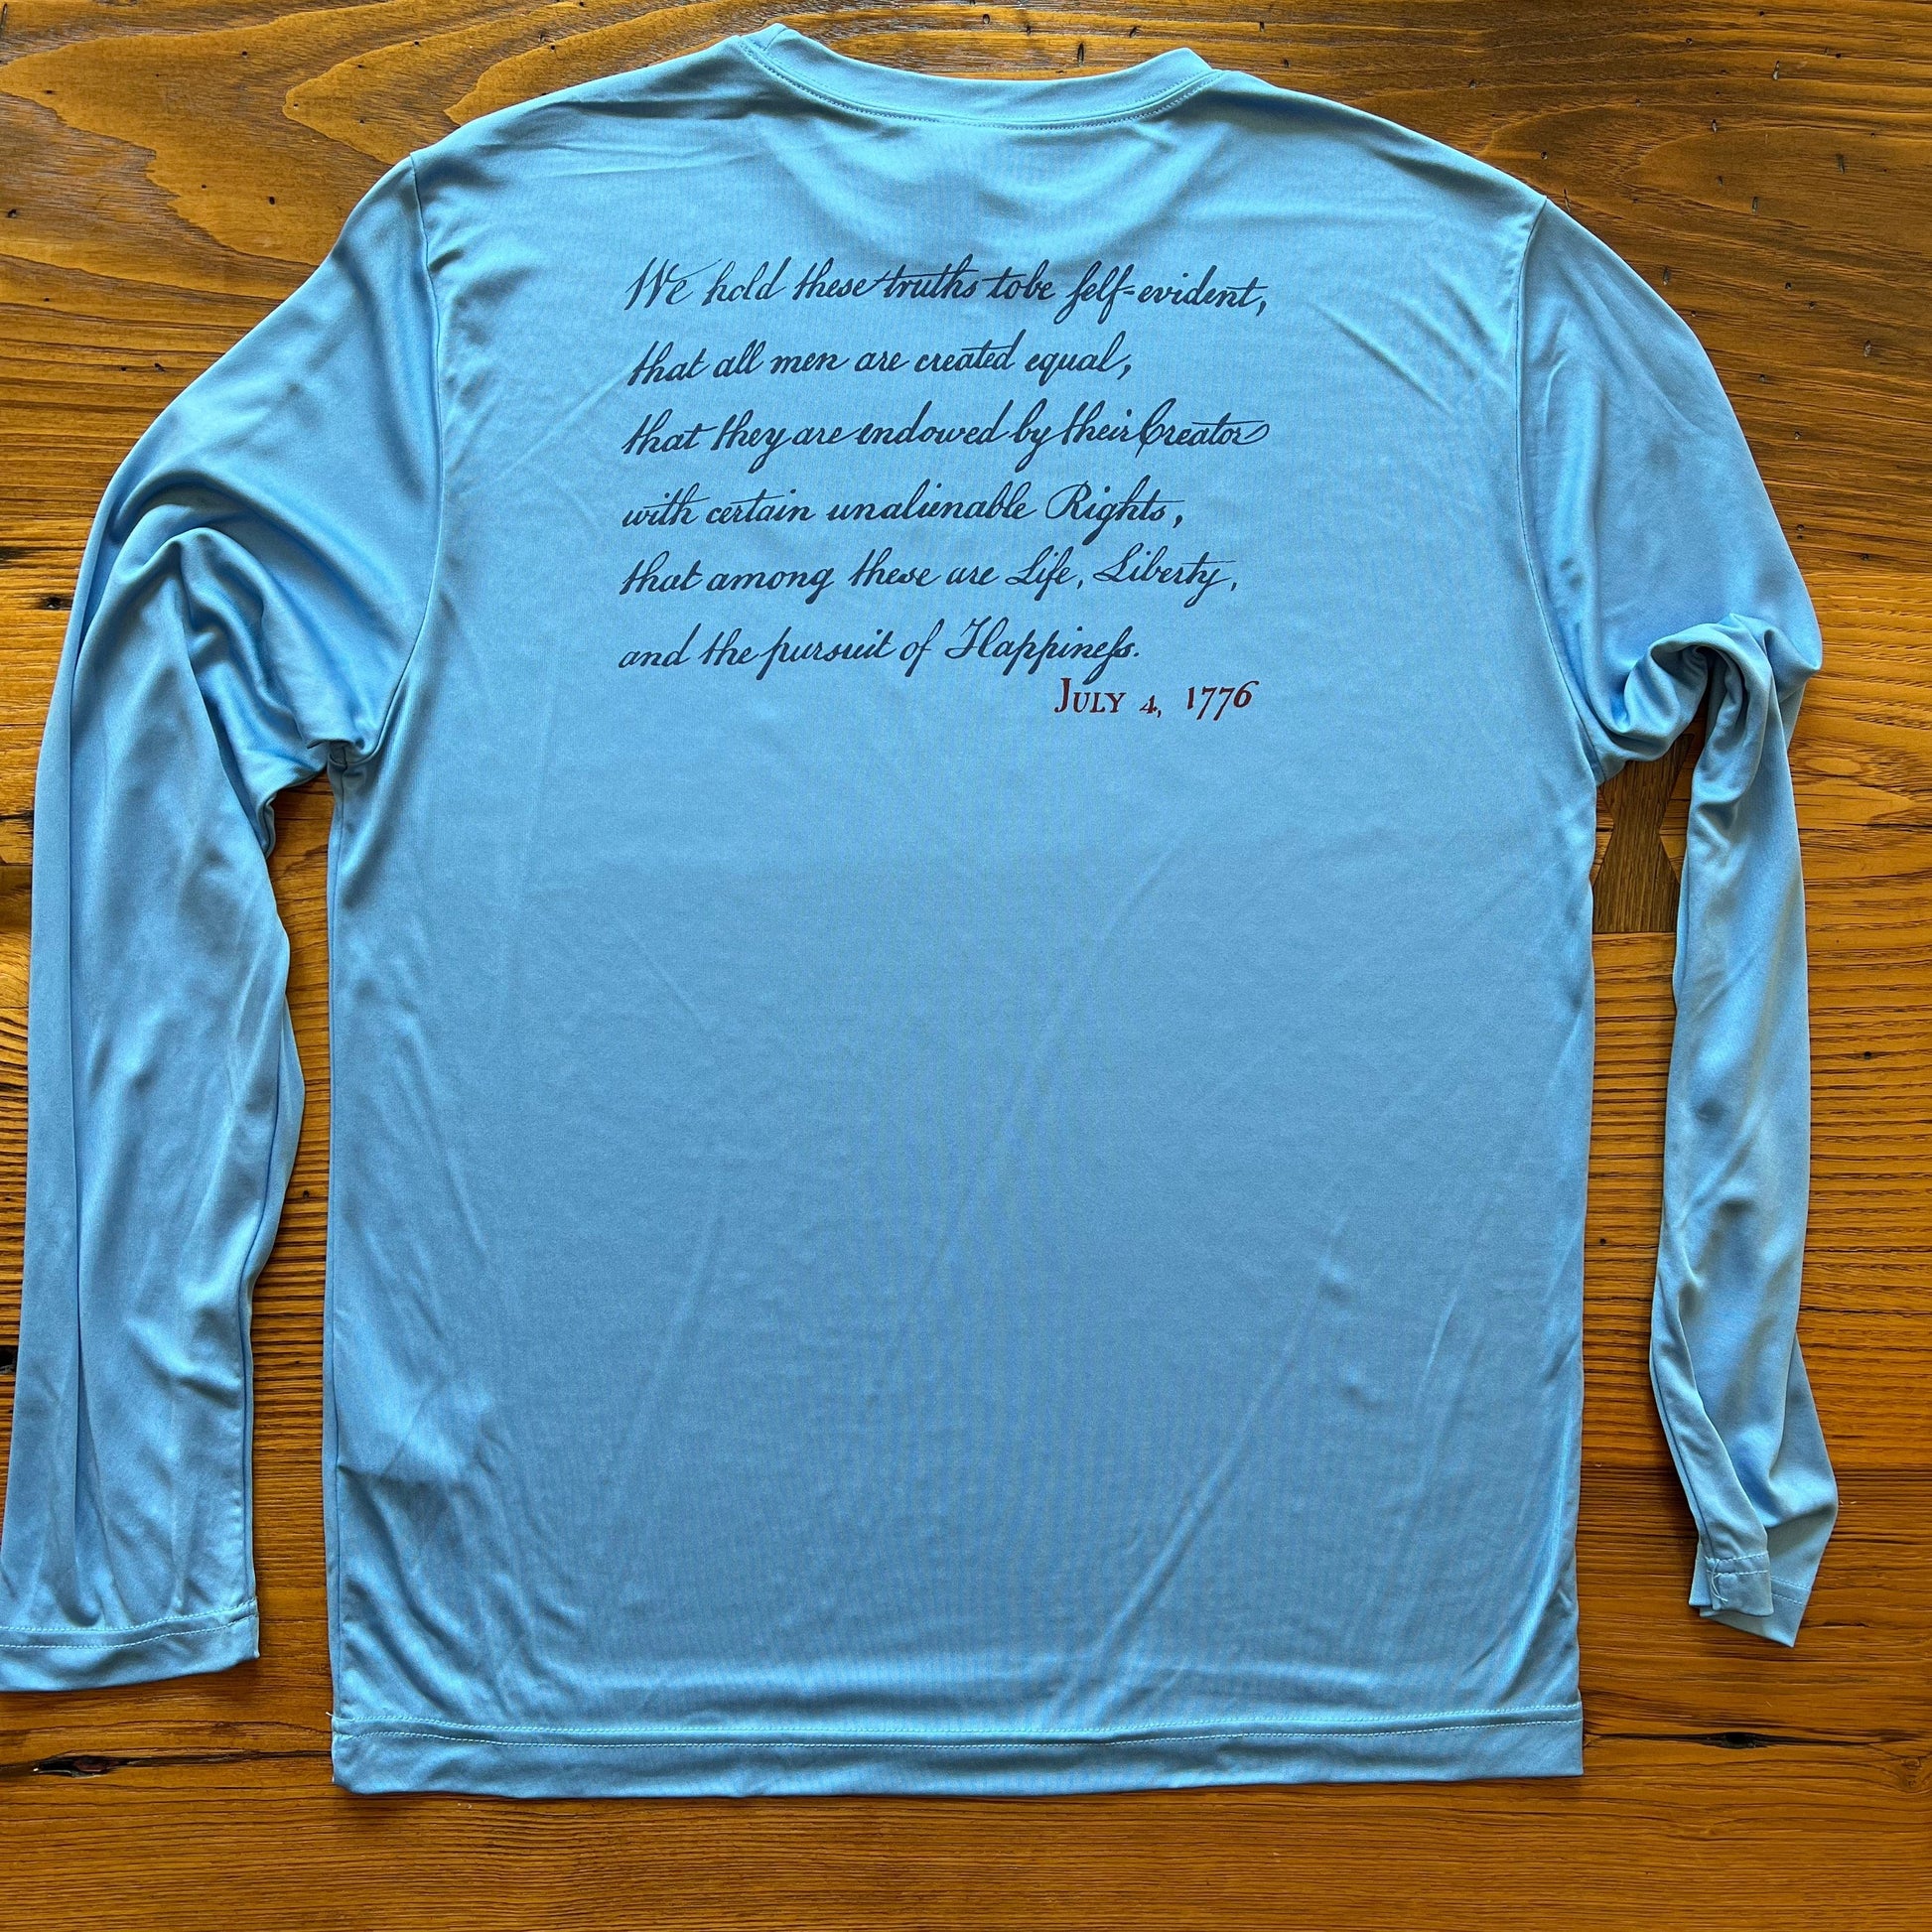 Back of "We hold these truths - July 4, 1776” on moisture-wicking 100% polyester interlock with SPF 40+ UV protection - Long-sleeved from The History List store